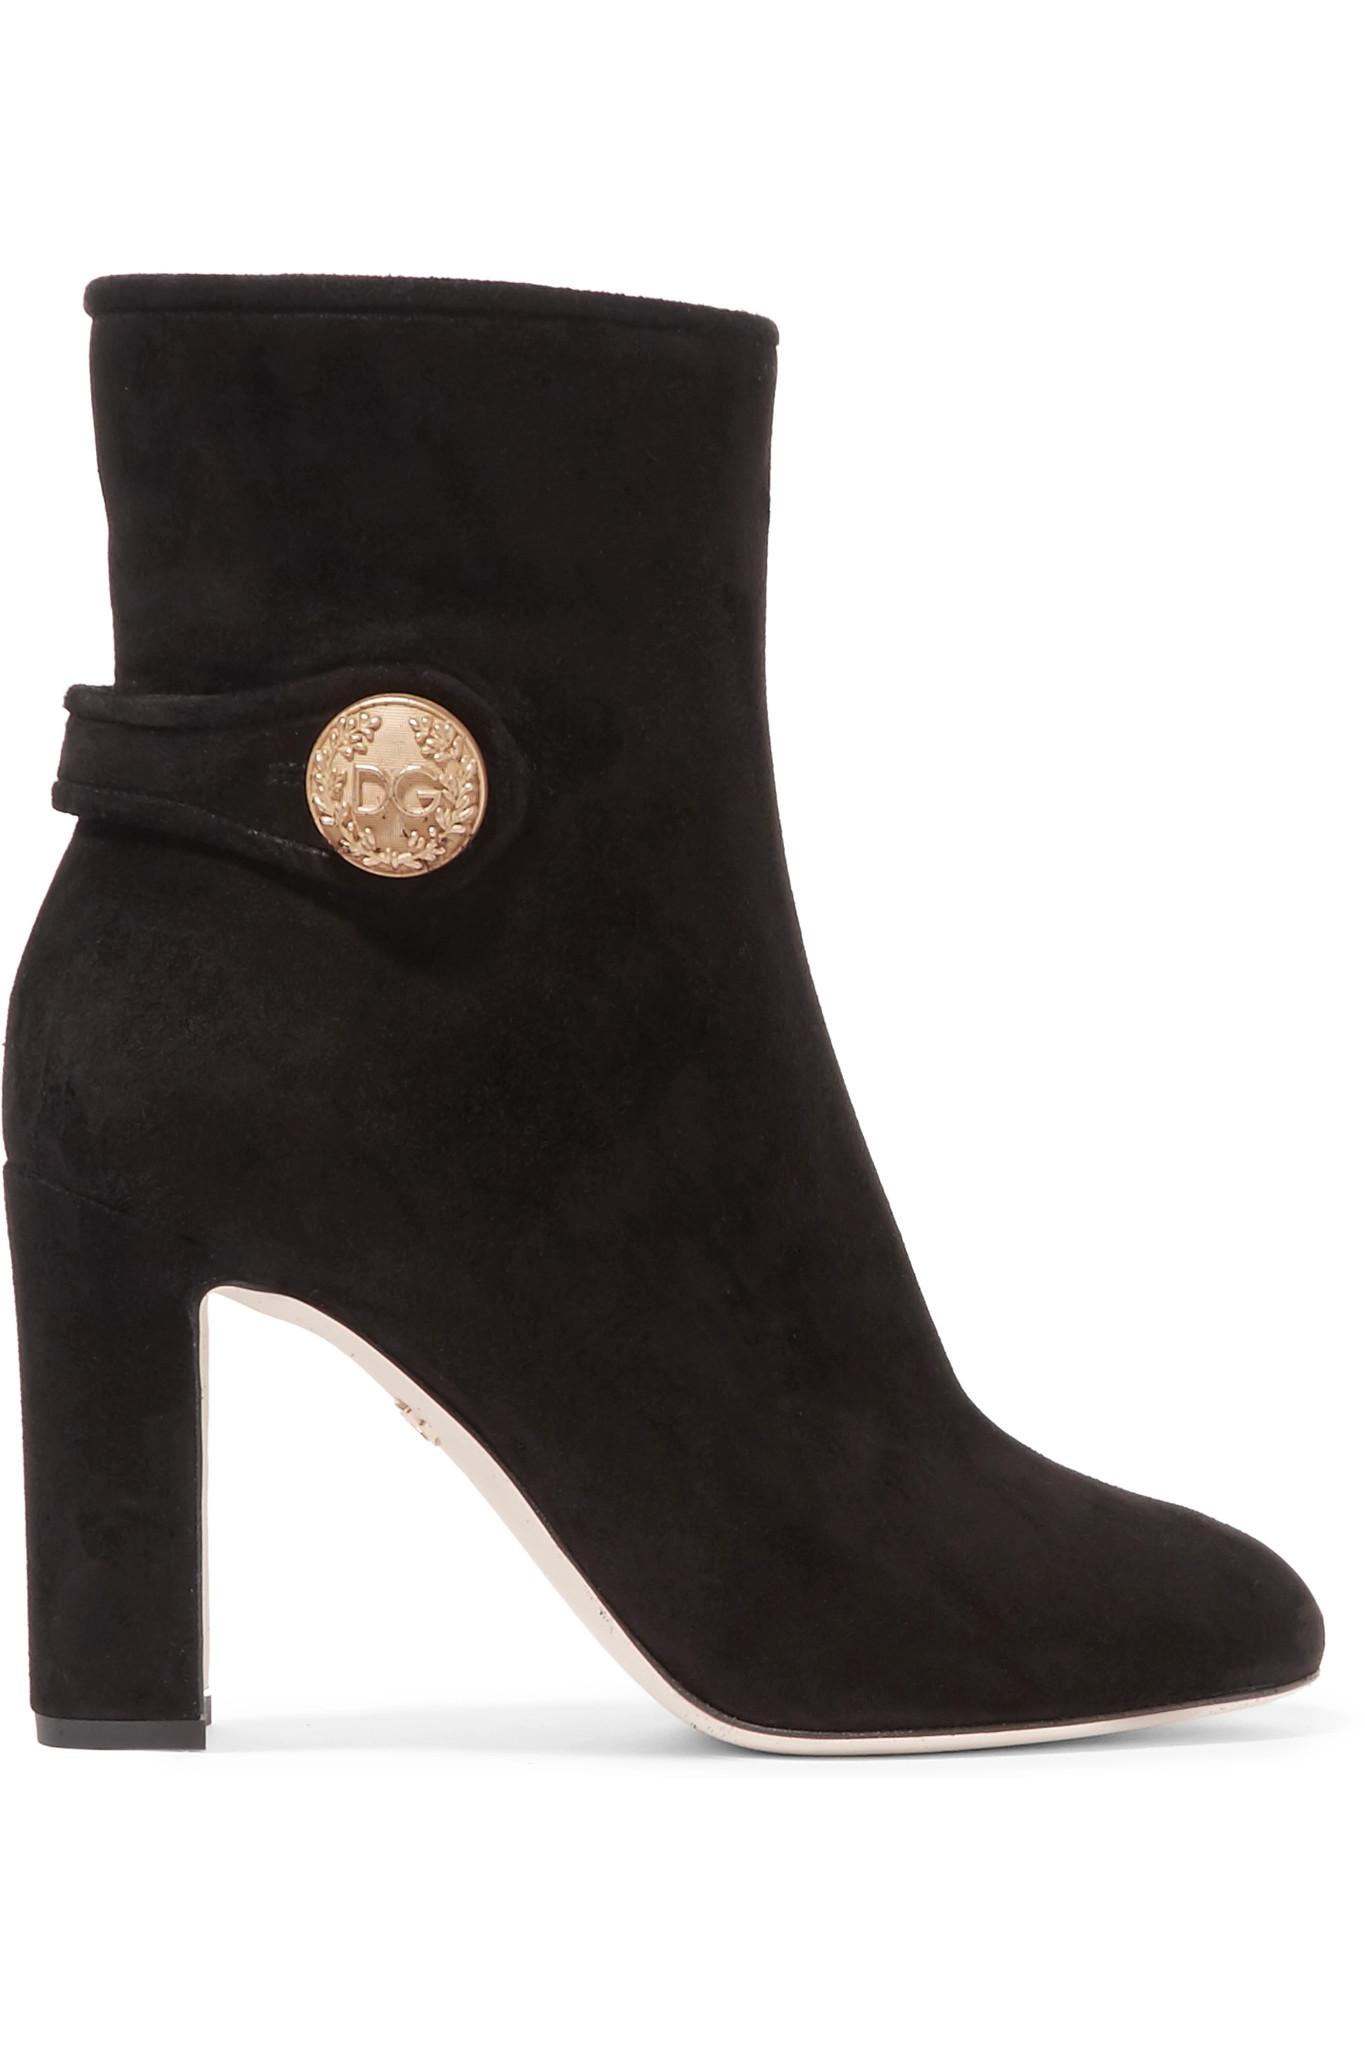 Dolce & Gabbana Embellished Suede Ankle Boots in Black - Lyst